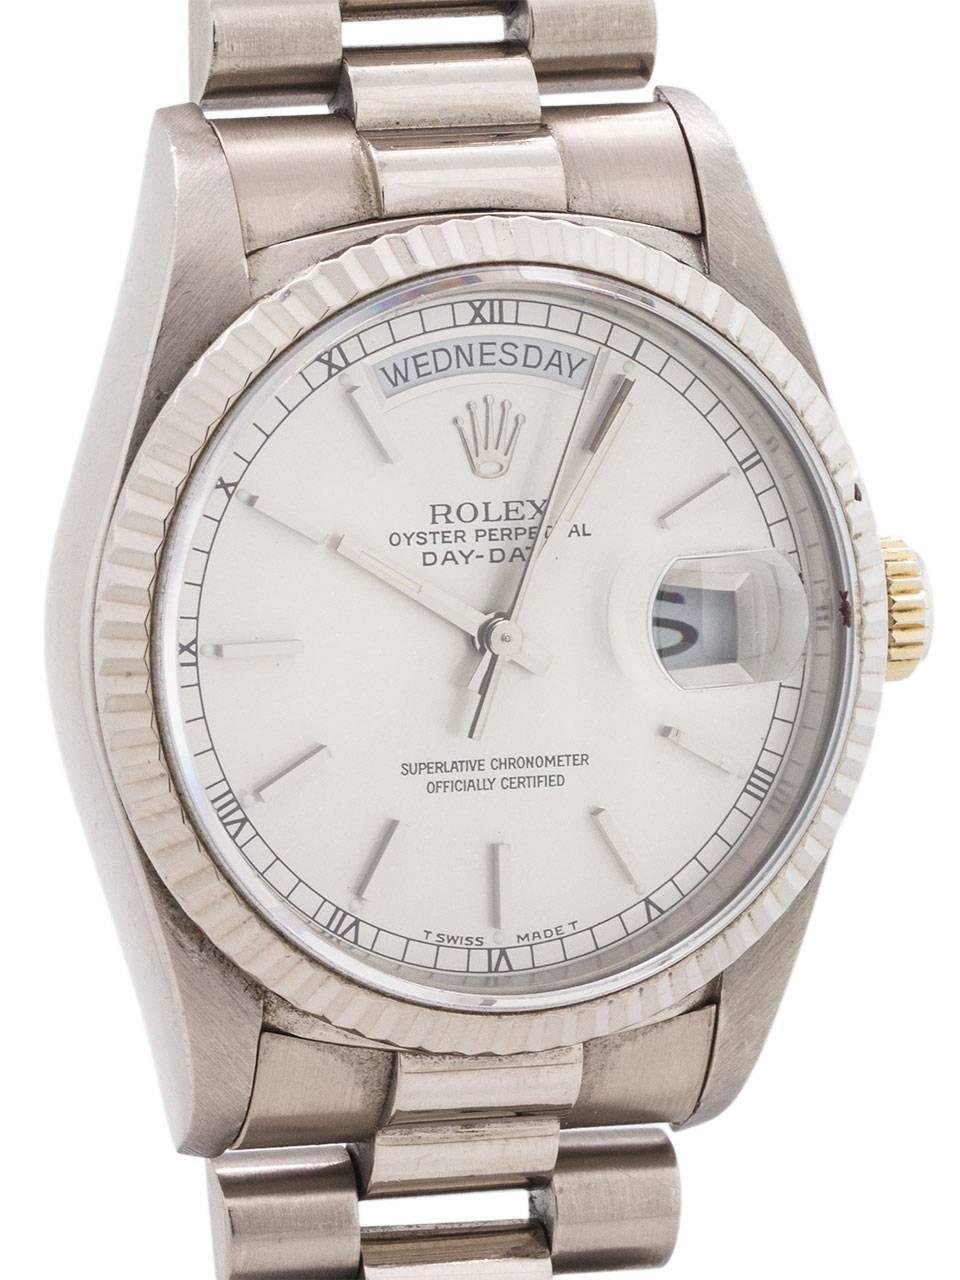 
Rolex 18K WG Day Date President ref# 18239, K serial # circa 1998. Featuring a 36mm diameter case with fluted bezel, sapphire crystal, and very pleasing original silvered satin dial with applied silver indexes and hands. Powered by calibre 3055